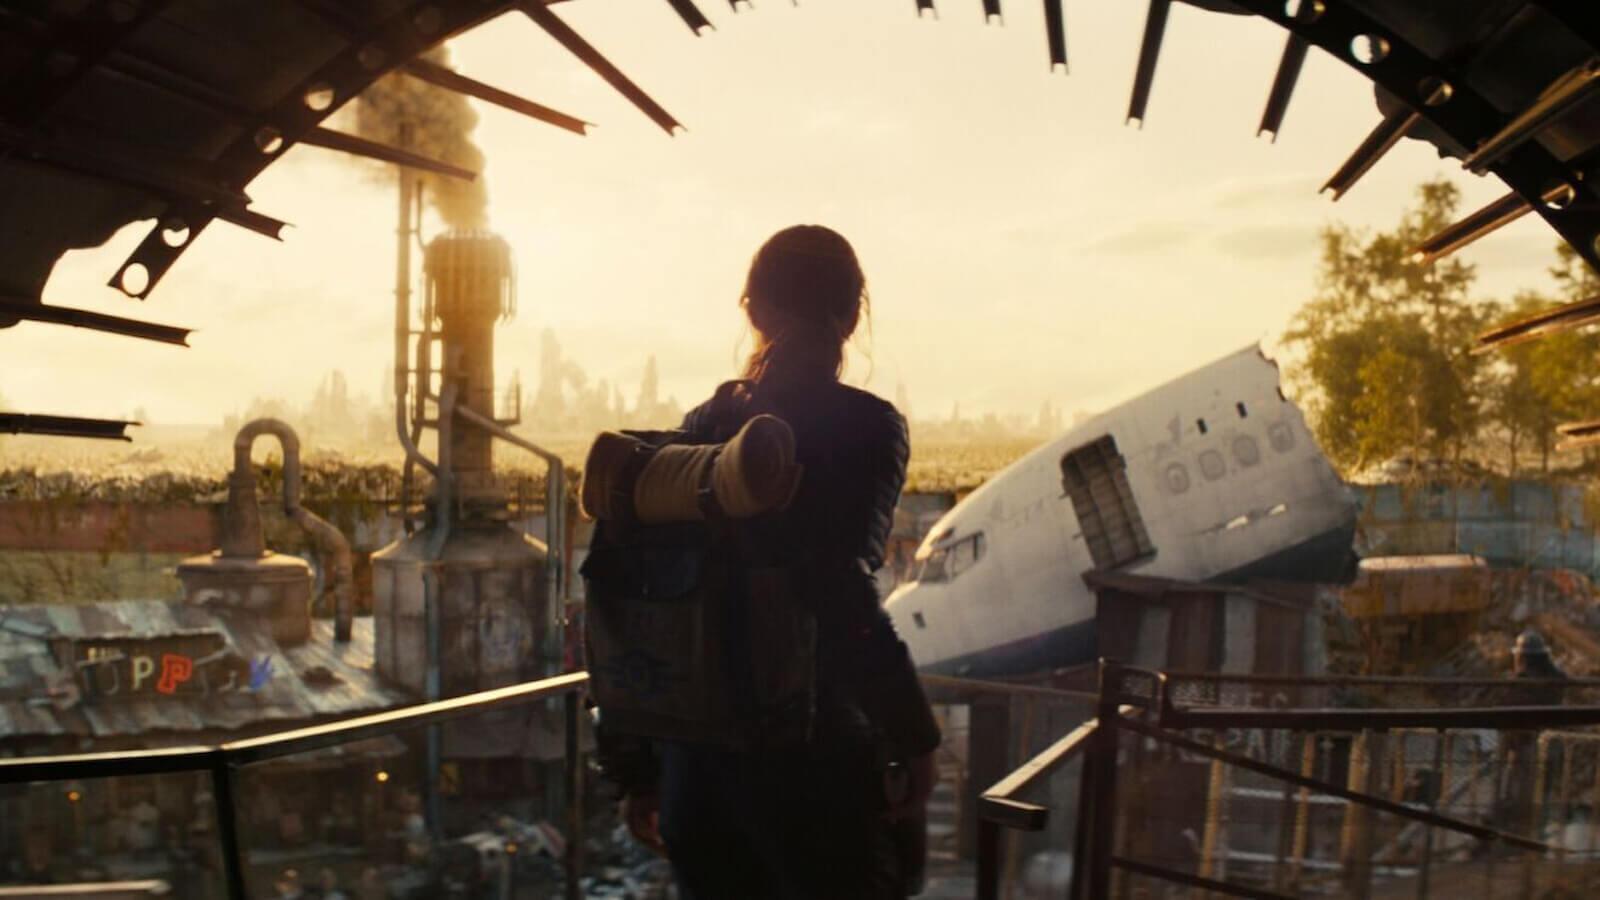 Fallout fans "hyped" for TV series after trailer sticks the landing